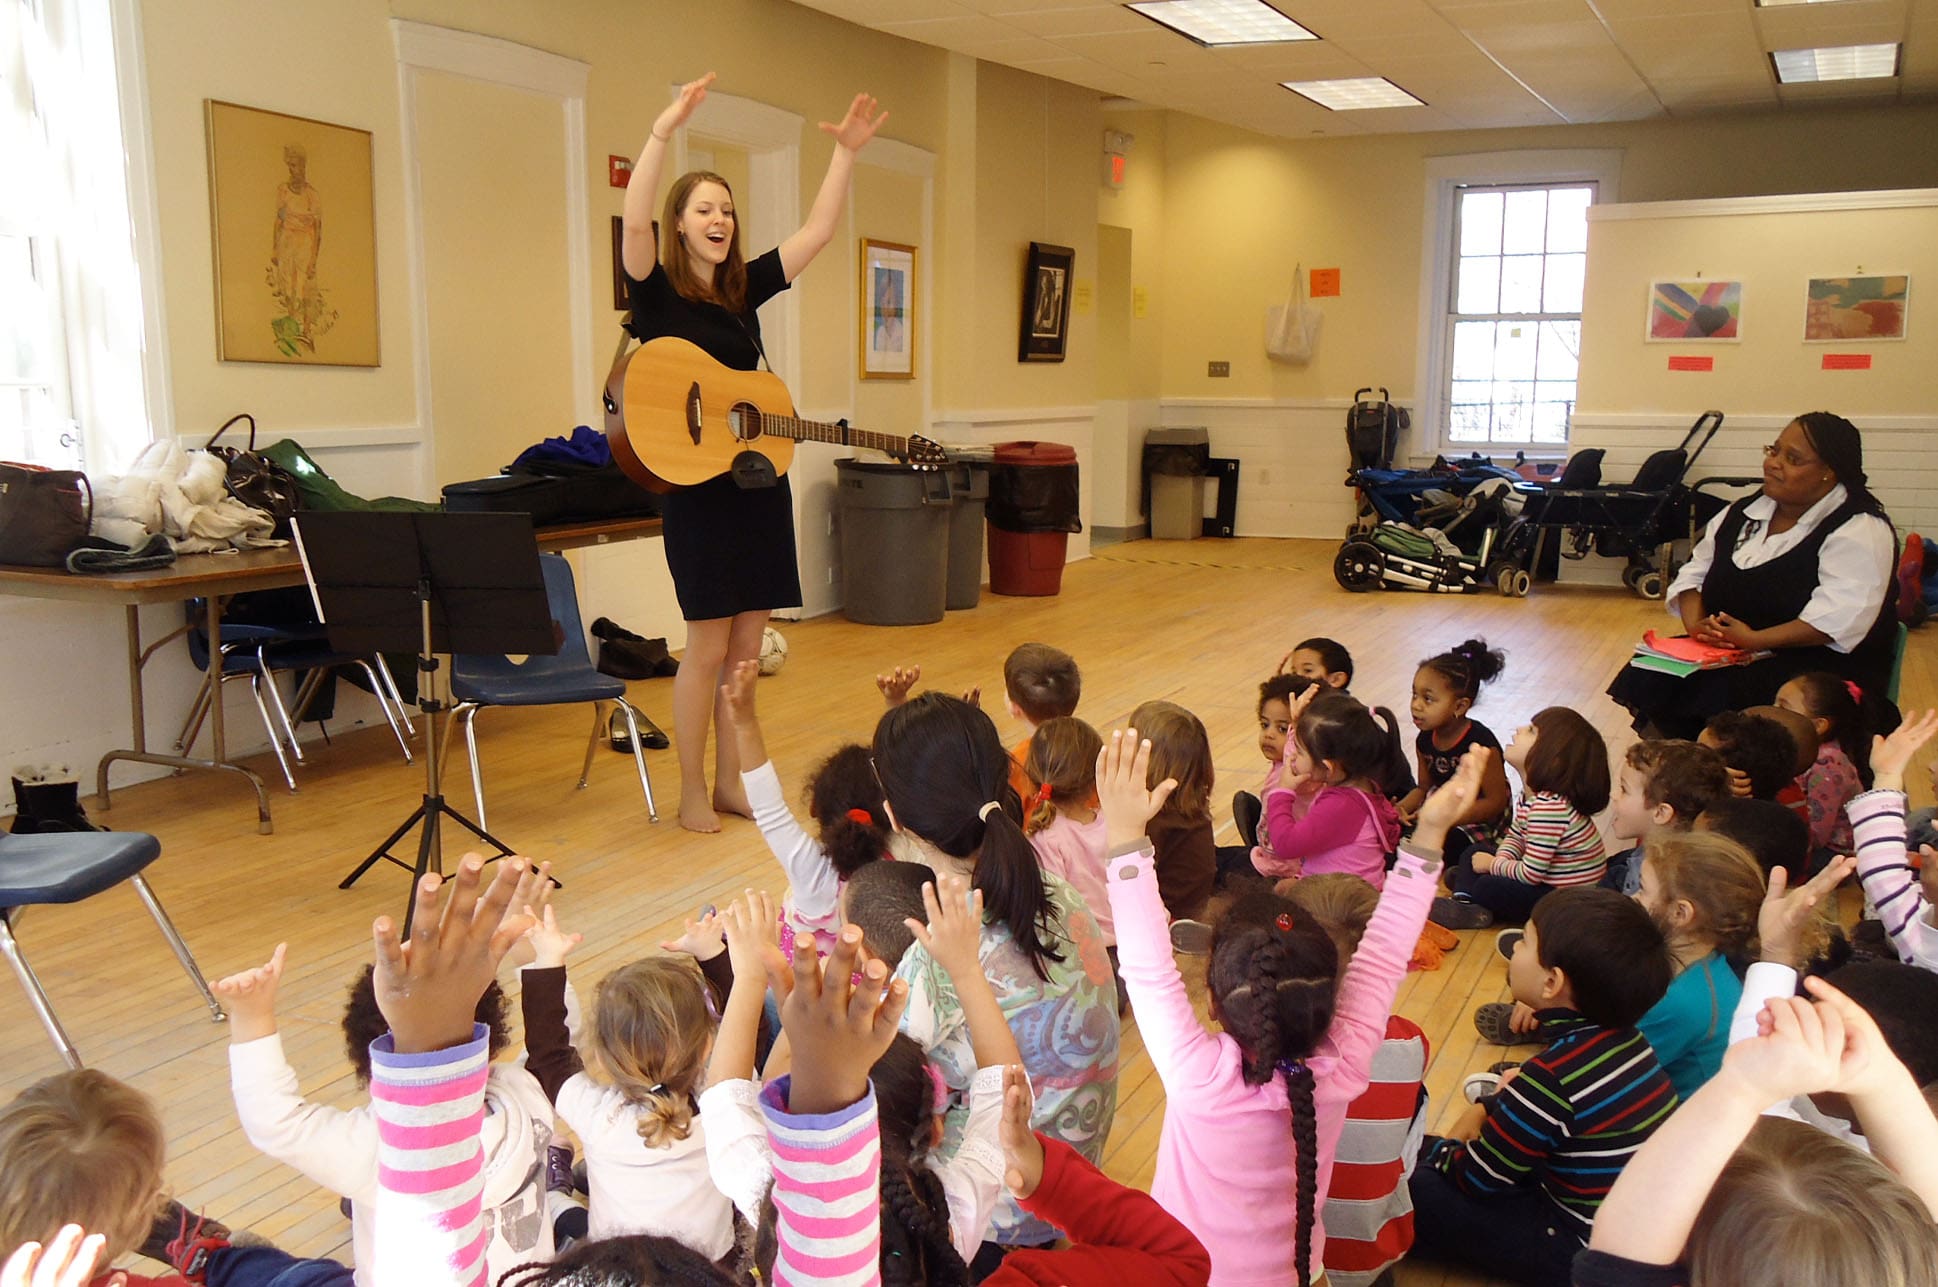 An NEC student holding a guitar and singing for a classroom full of toddlers.